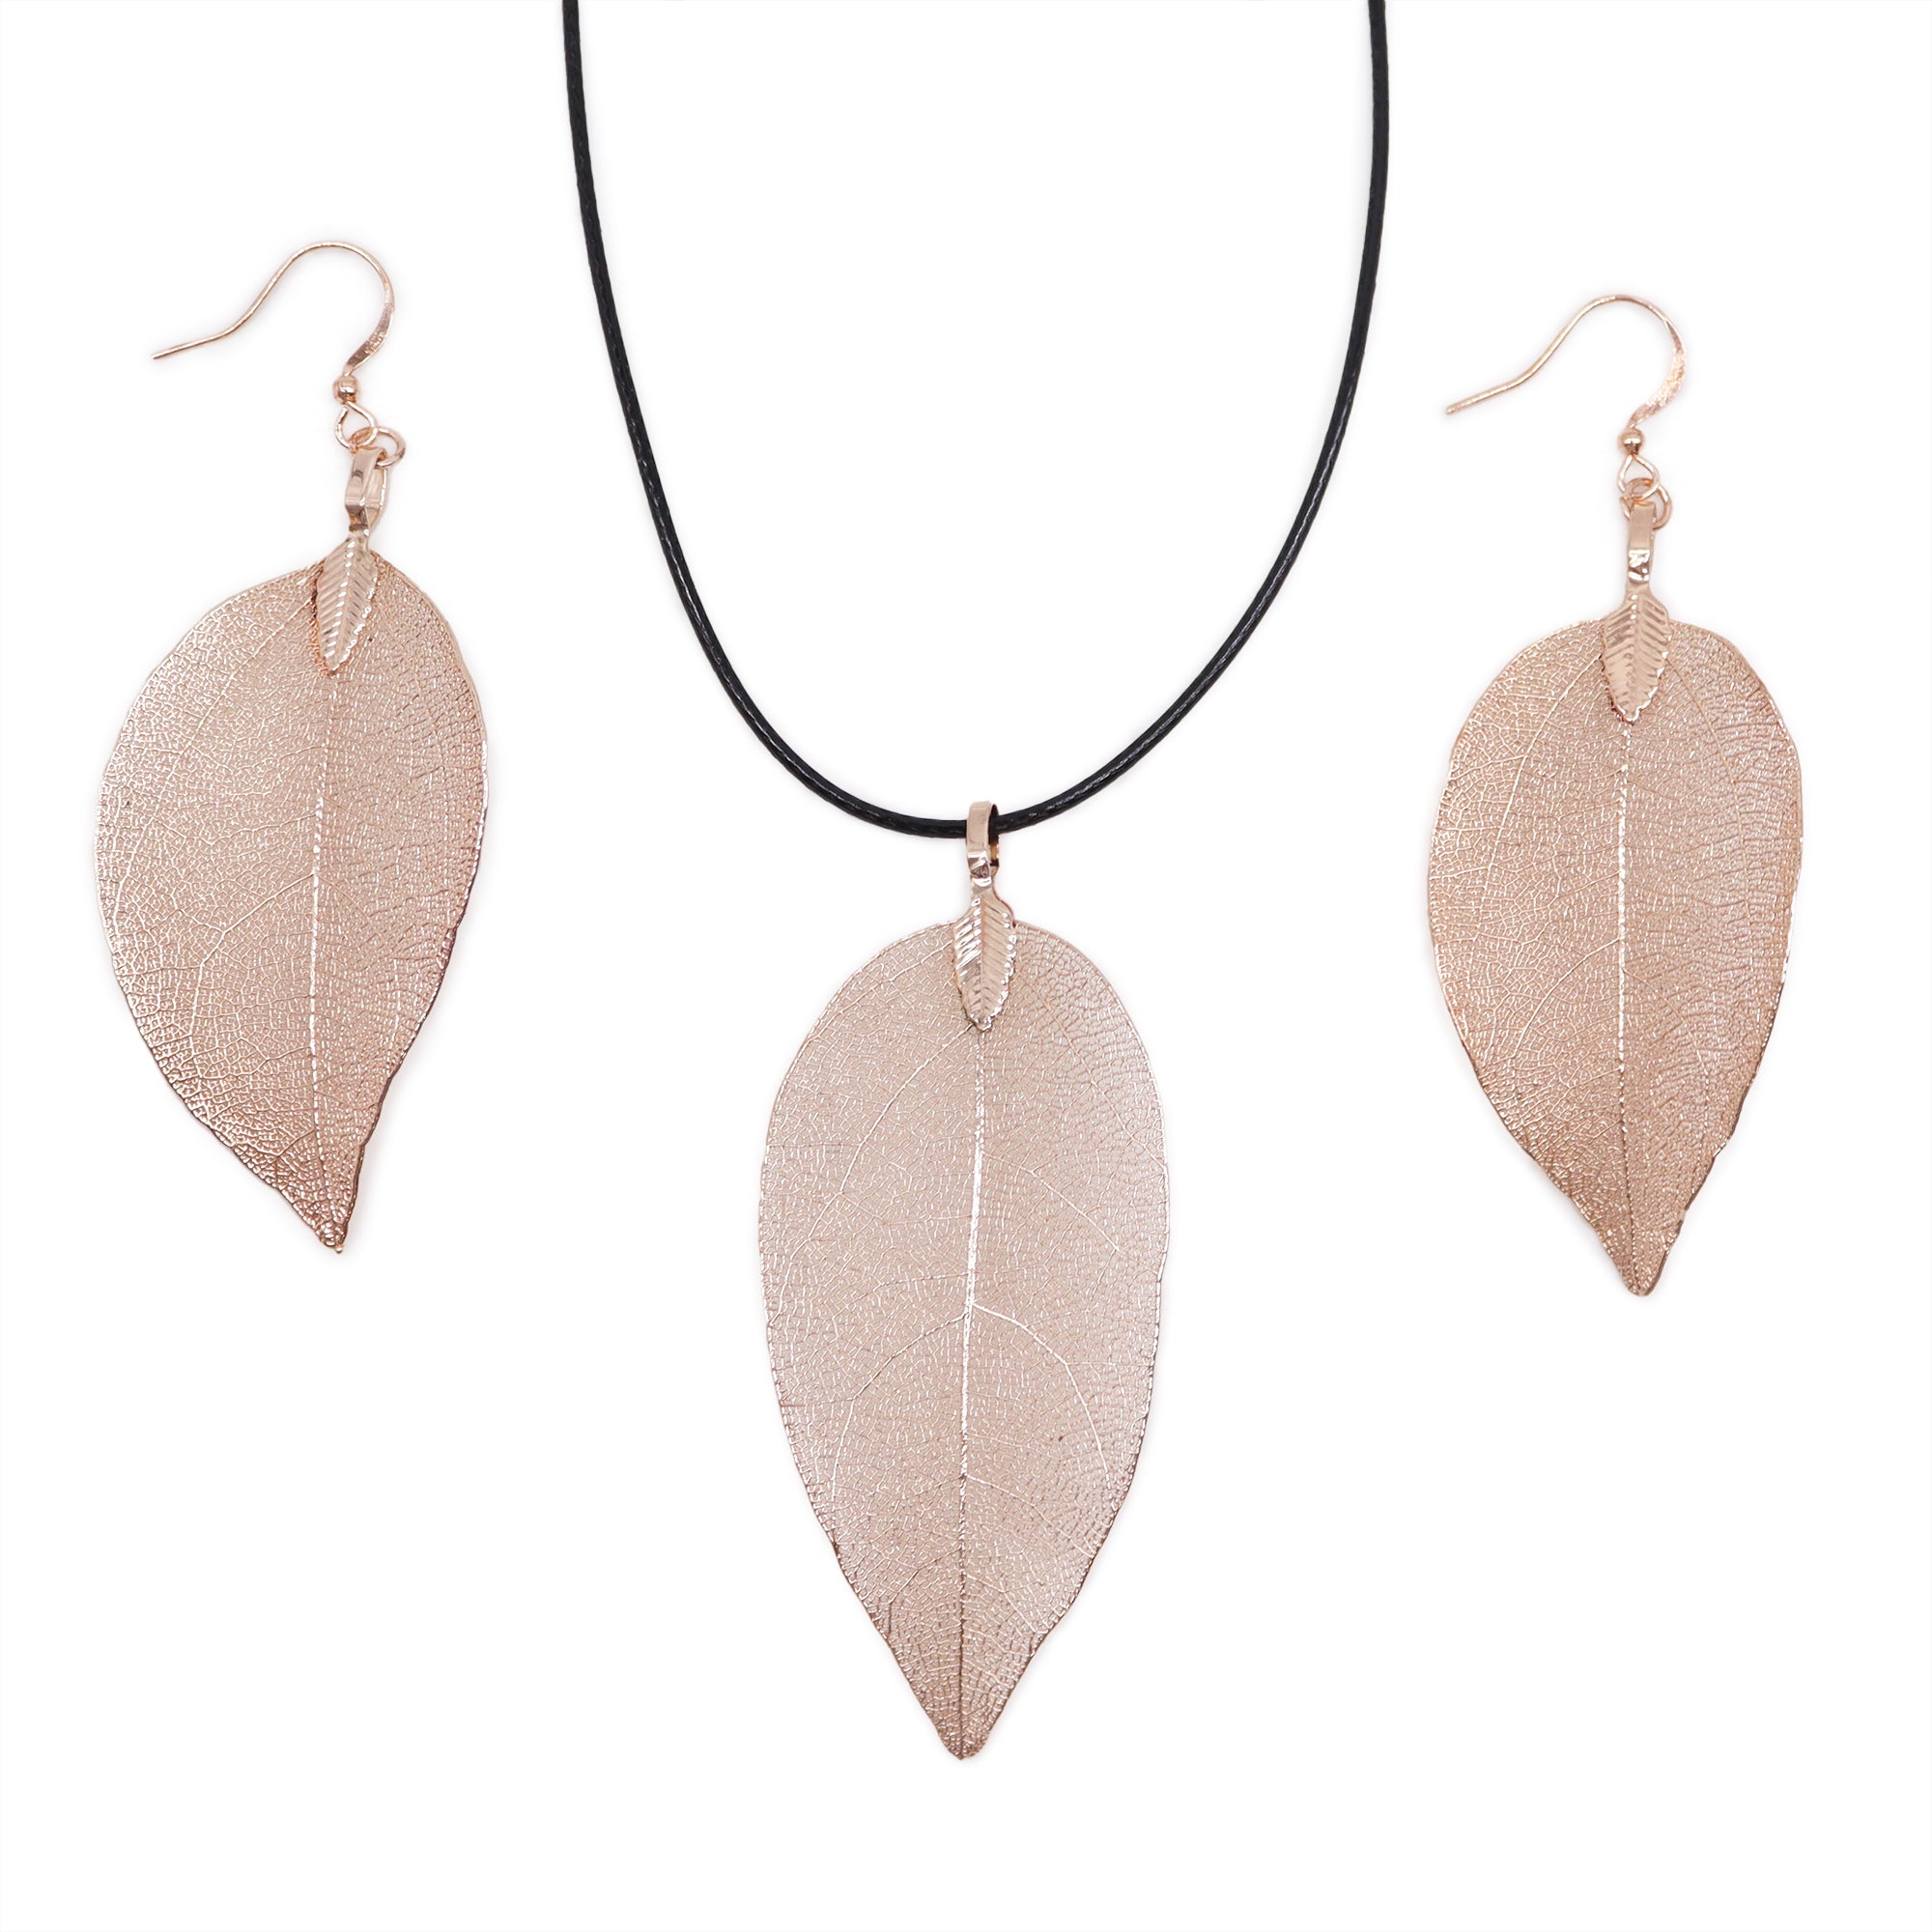 View Necklace Earring Set Bravery Leaf Pink Gold information